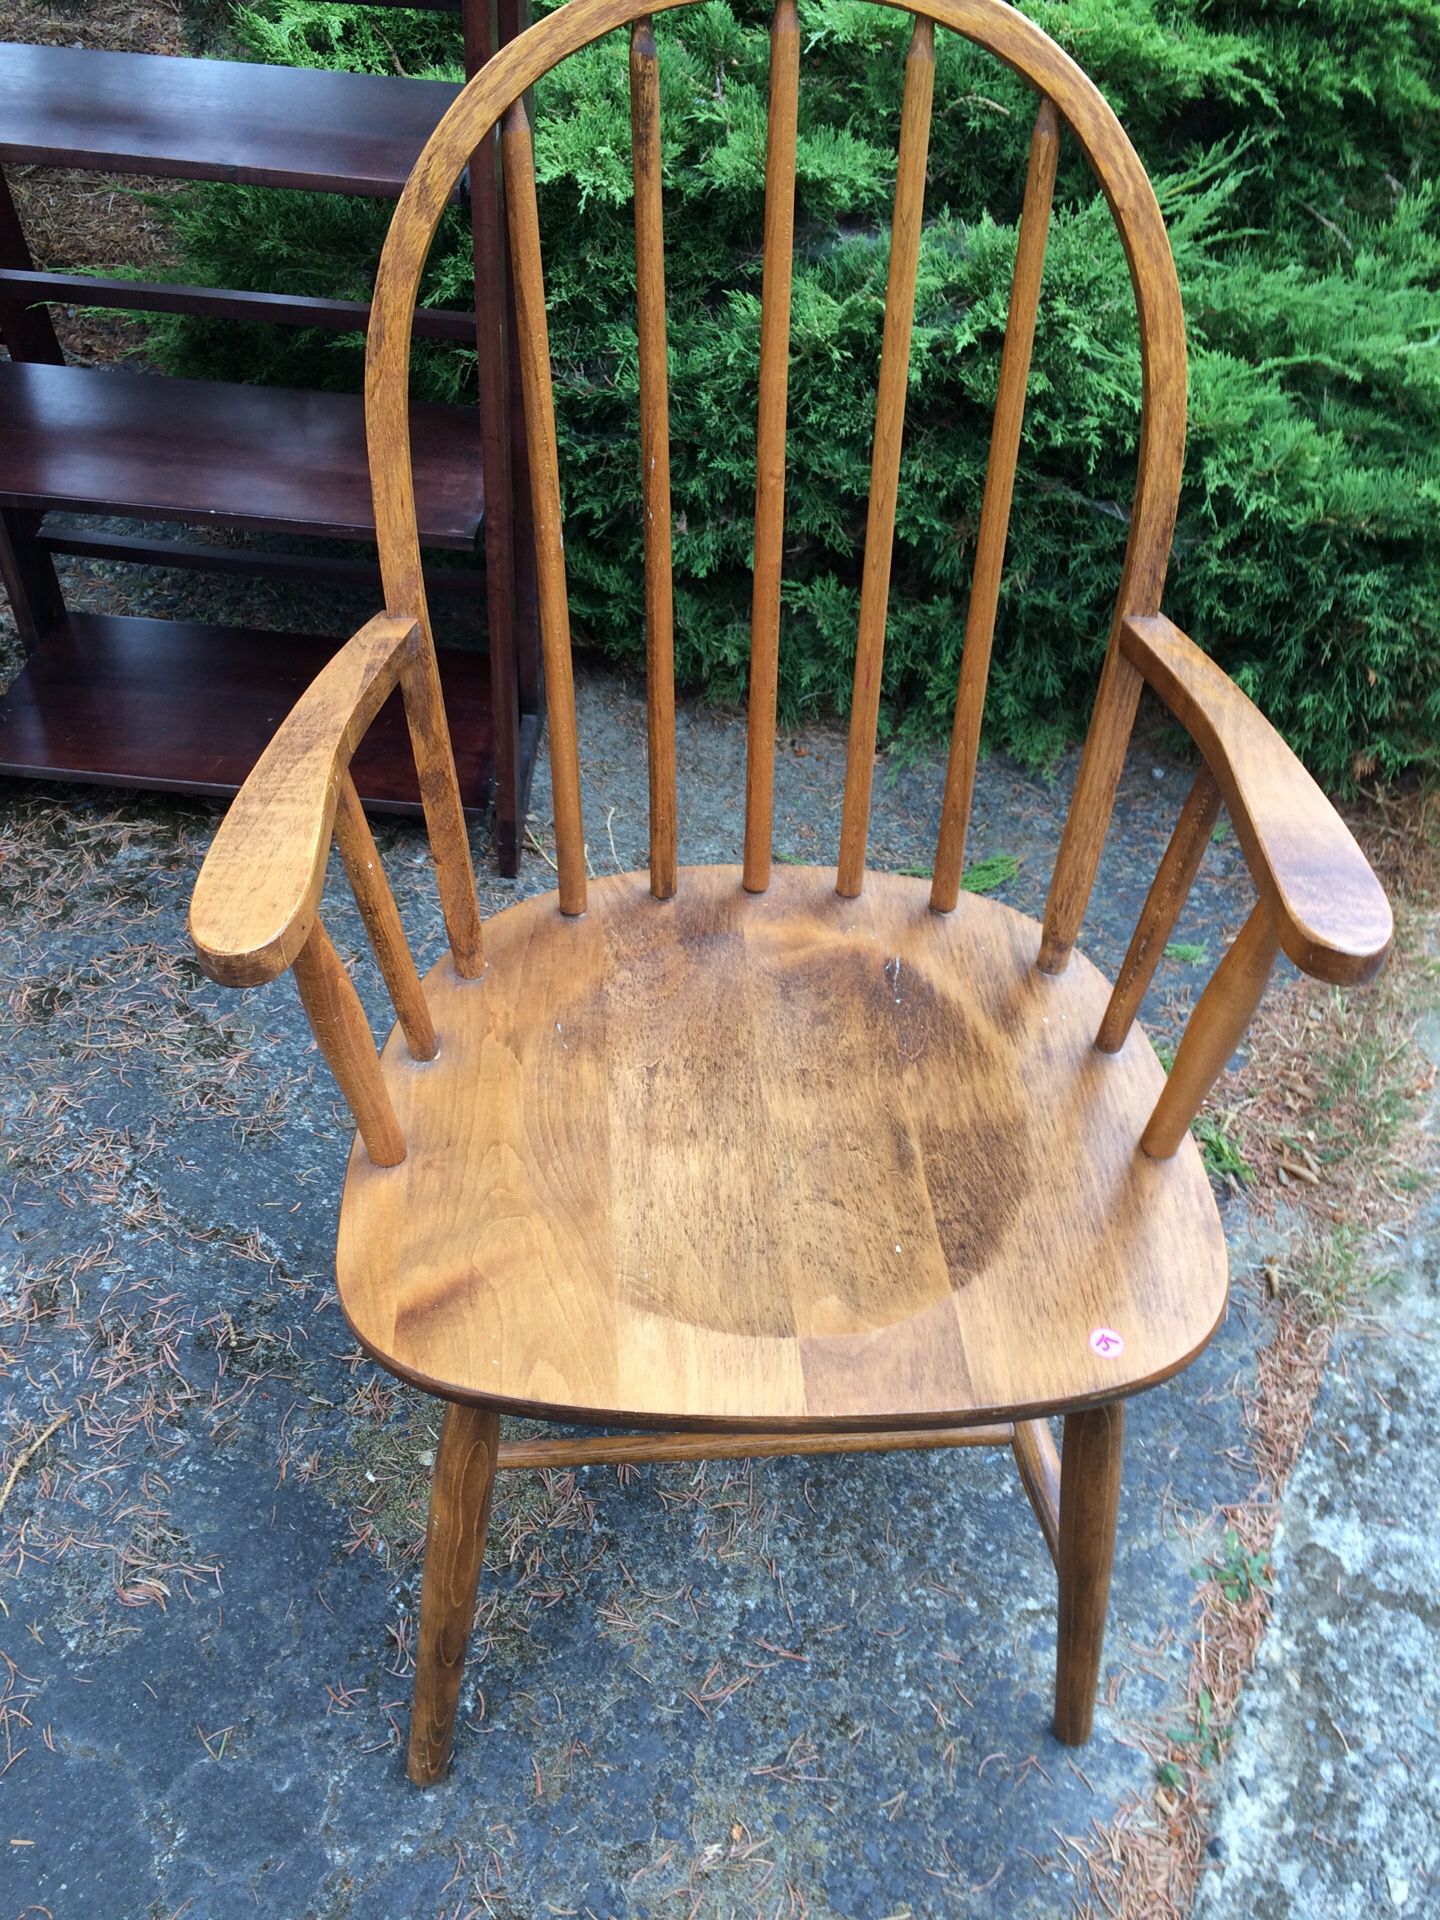 Antique spindle chair